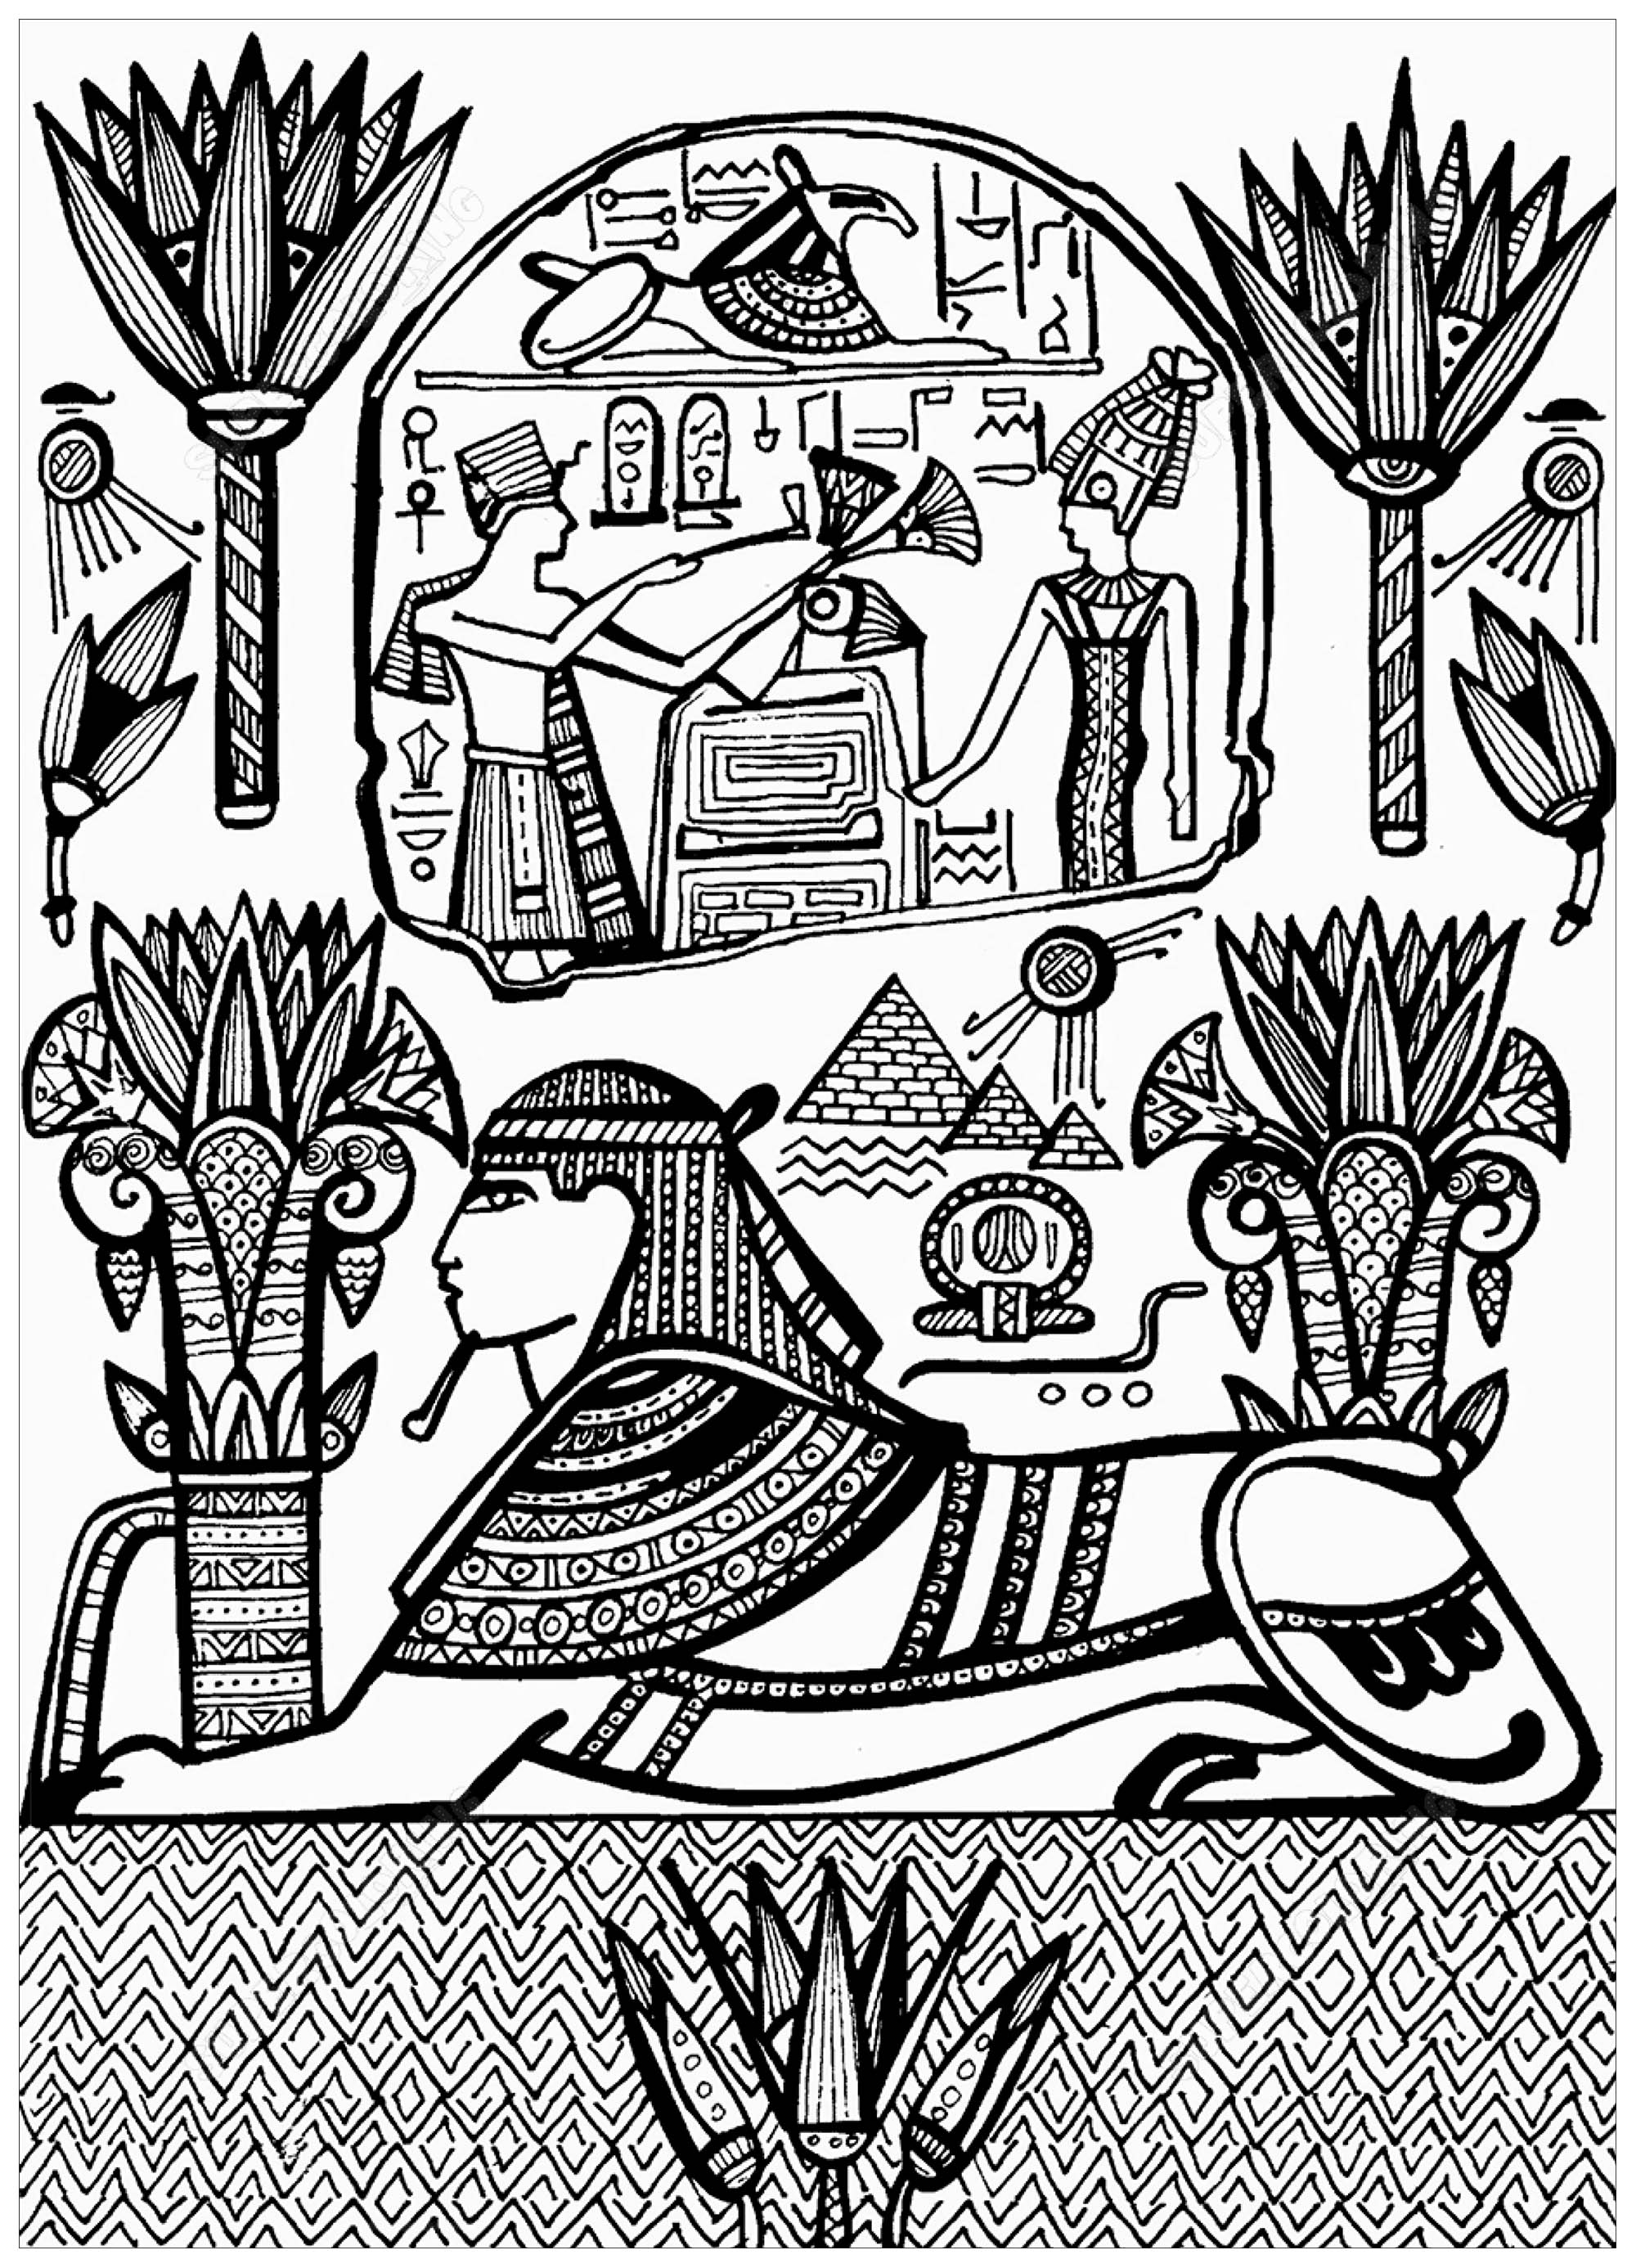 Drawing representing Sphynx with Hieroglyphs, inspired by a fresco dating from Ancient Egypt, Artist : Krivosheeva Olga (Ori Akuma)   Source : Supercoloring